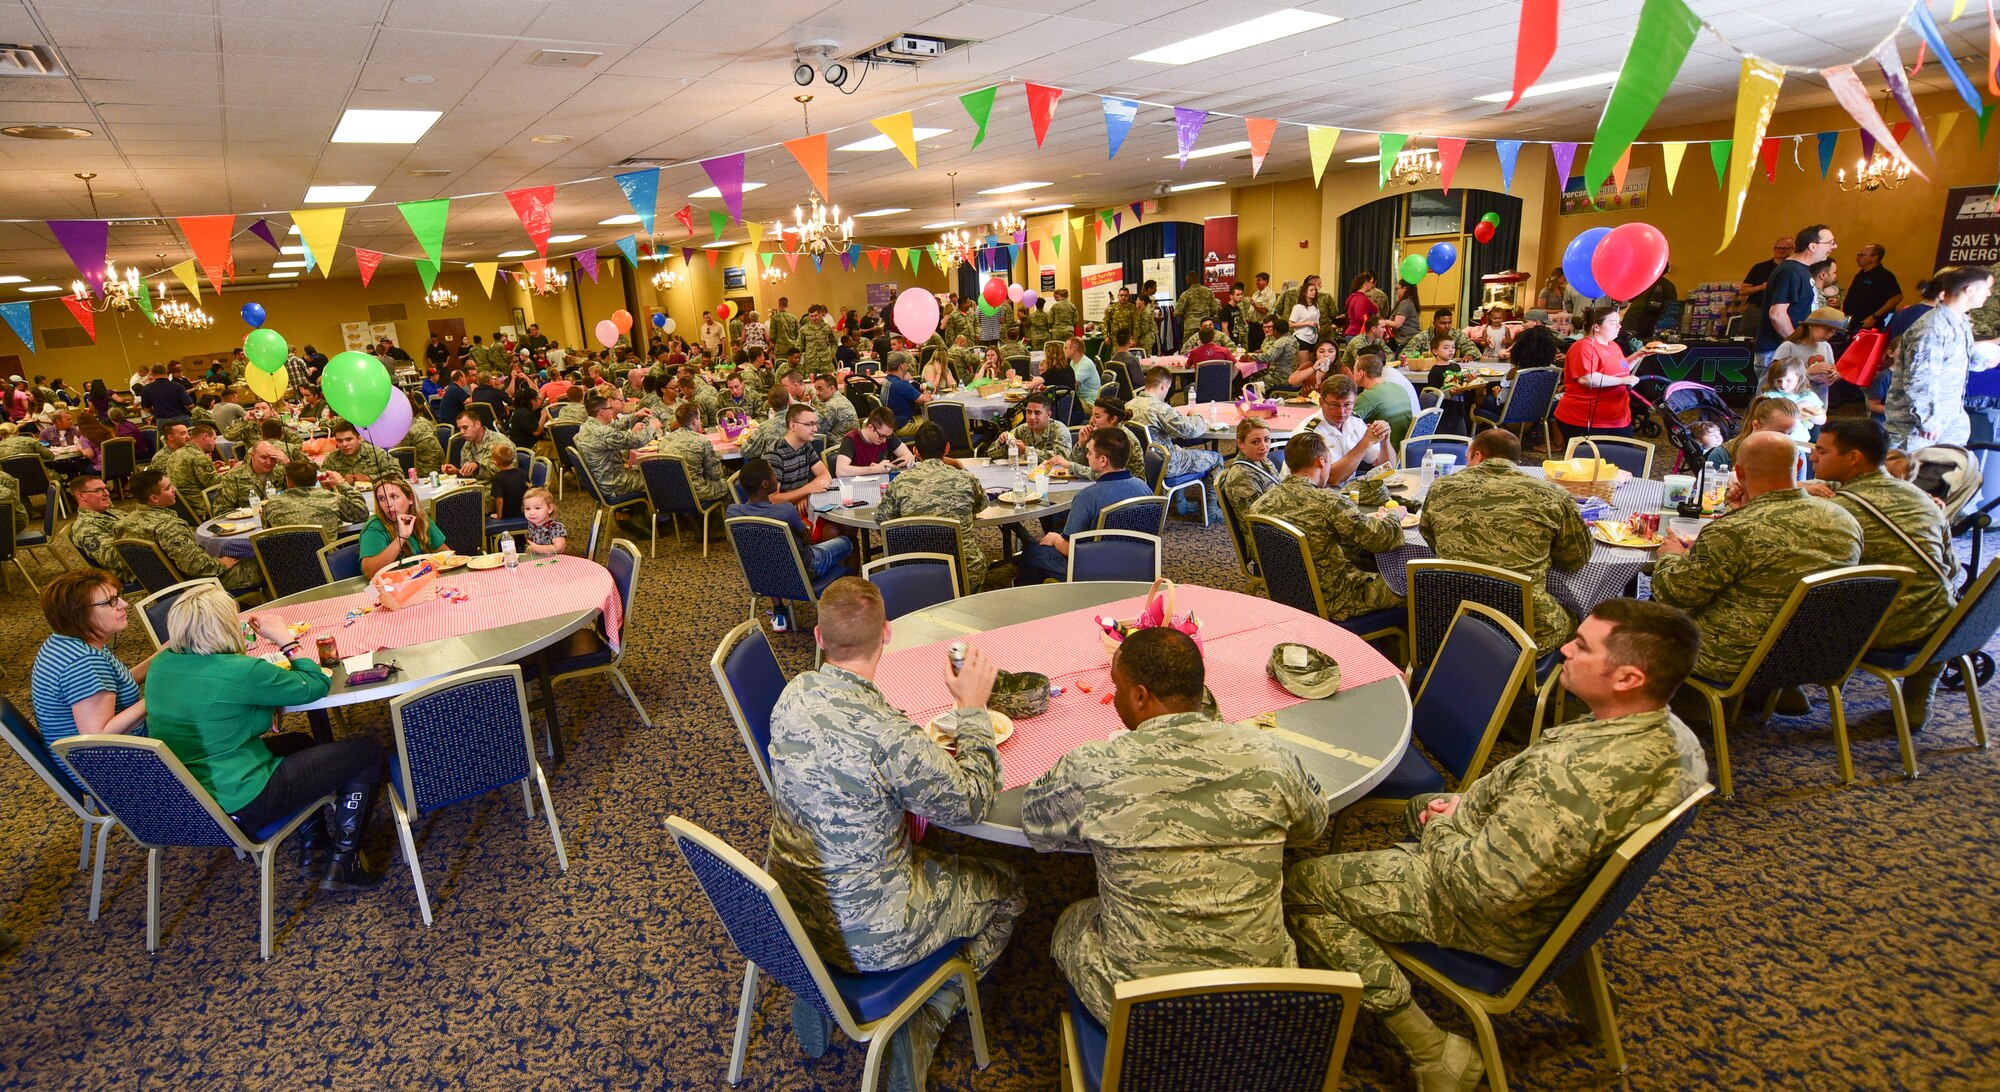 Ellsworth Airmen and their families eat and socialize during the annual base picnic inside the Dakota’s Club at Ellsworth Air Force Base, S.D., June 22, 2018. The picnic provided Airmen the opportunity to take a break from work while enjoying a free lunch and various activities. (U.S. Air Force photo by Senior Airman Randahl J. Jenson)